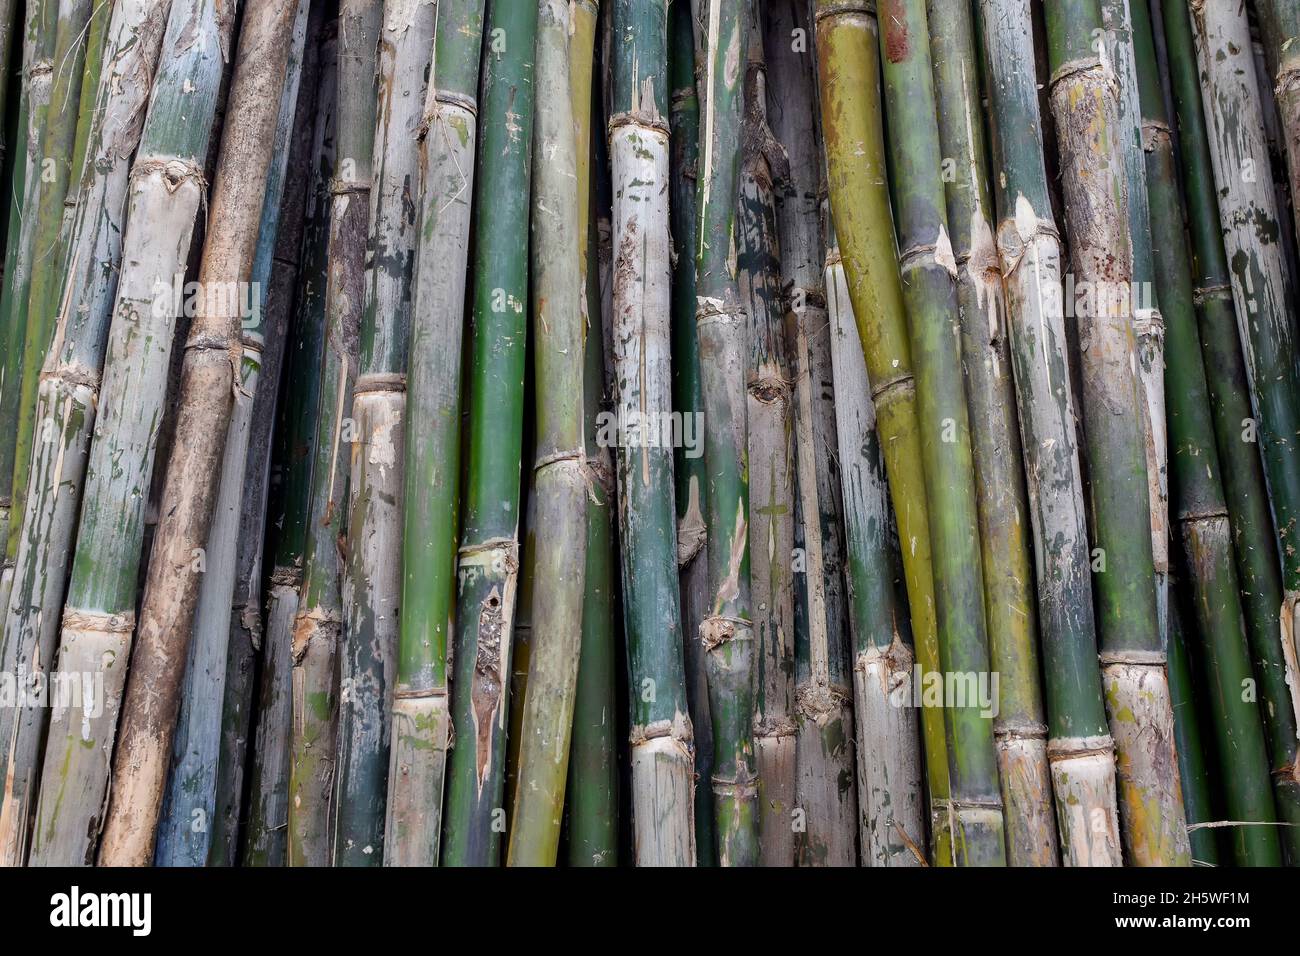 Harvested bamboo at market kept standing for selling. Used selective focus. Stock Photo